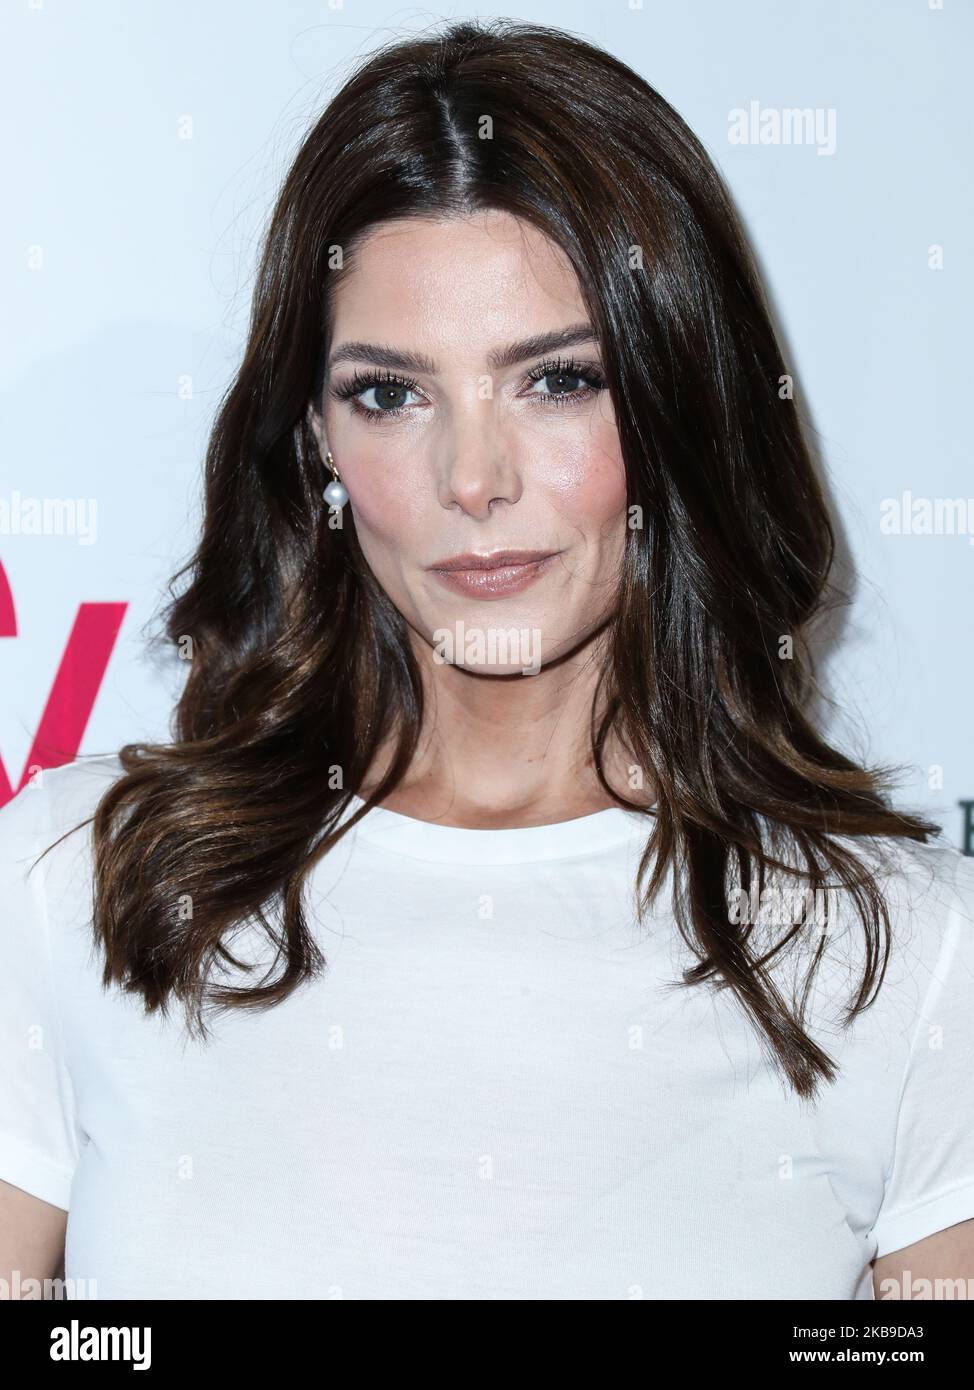 CULVER CITY, LOS ANGELES, CALIFORNIA, USA - OCTOBER 27: Actress Ashley Greene arrives at the Elizabeth Glaser Pediatric AIDS Foundation's 30th Annual A Time for Heroes Family Festival held at Smashbox Studios on October 27, 2019 in Culver City, Los Angeles, California, United States. (Photo by Xavier Collin/Image Press Agency/NurPhoto) Stock Photo